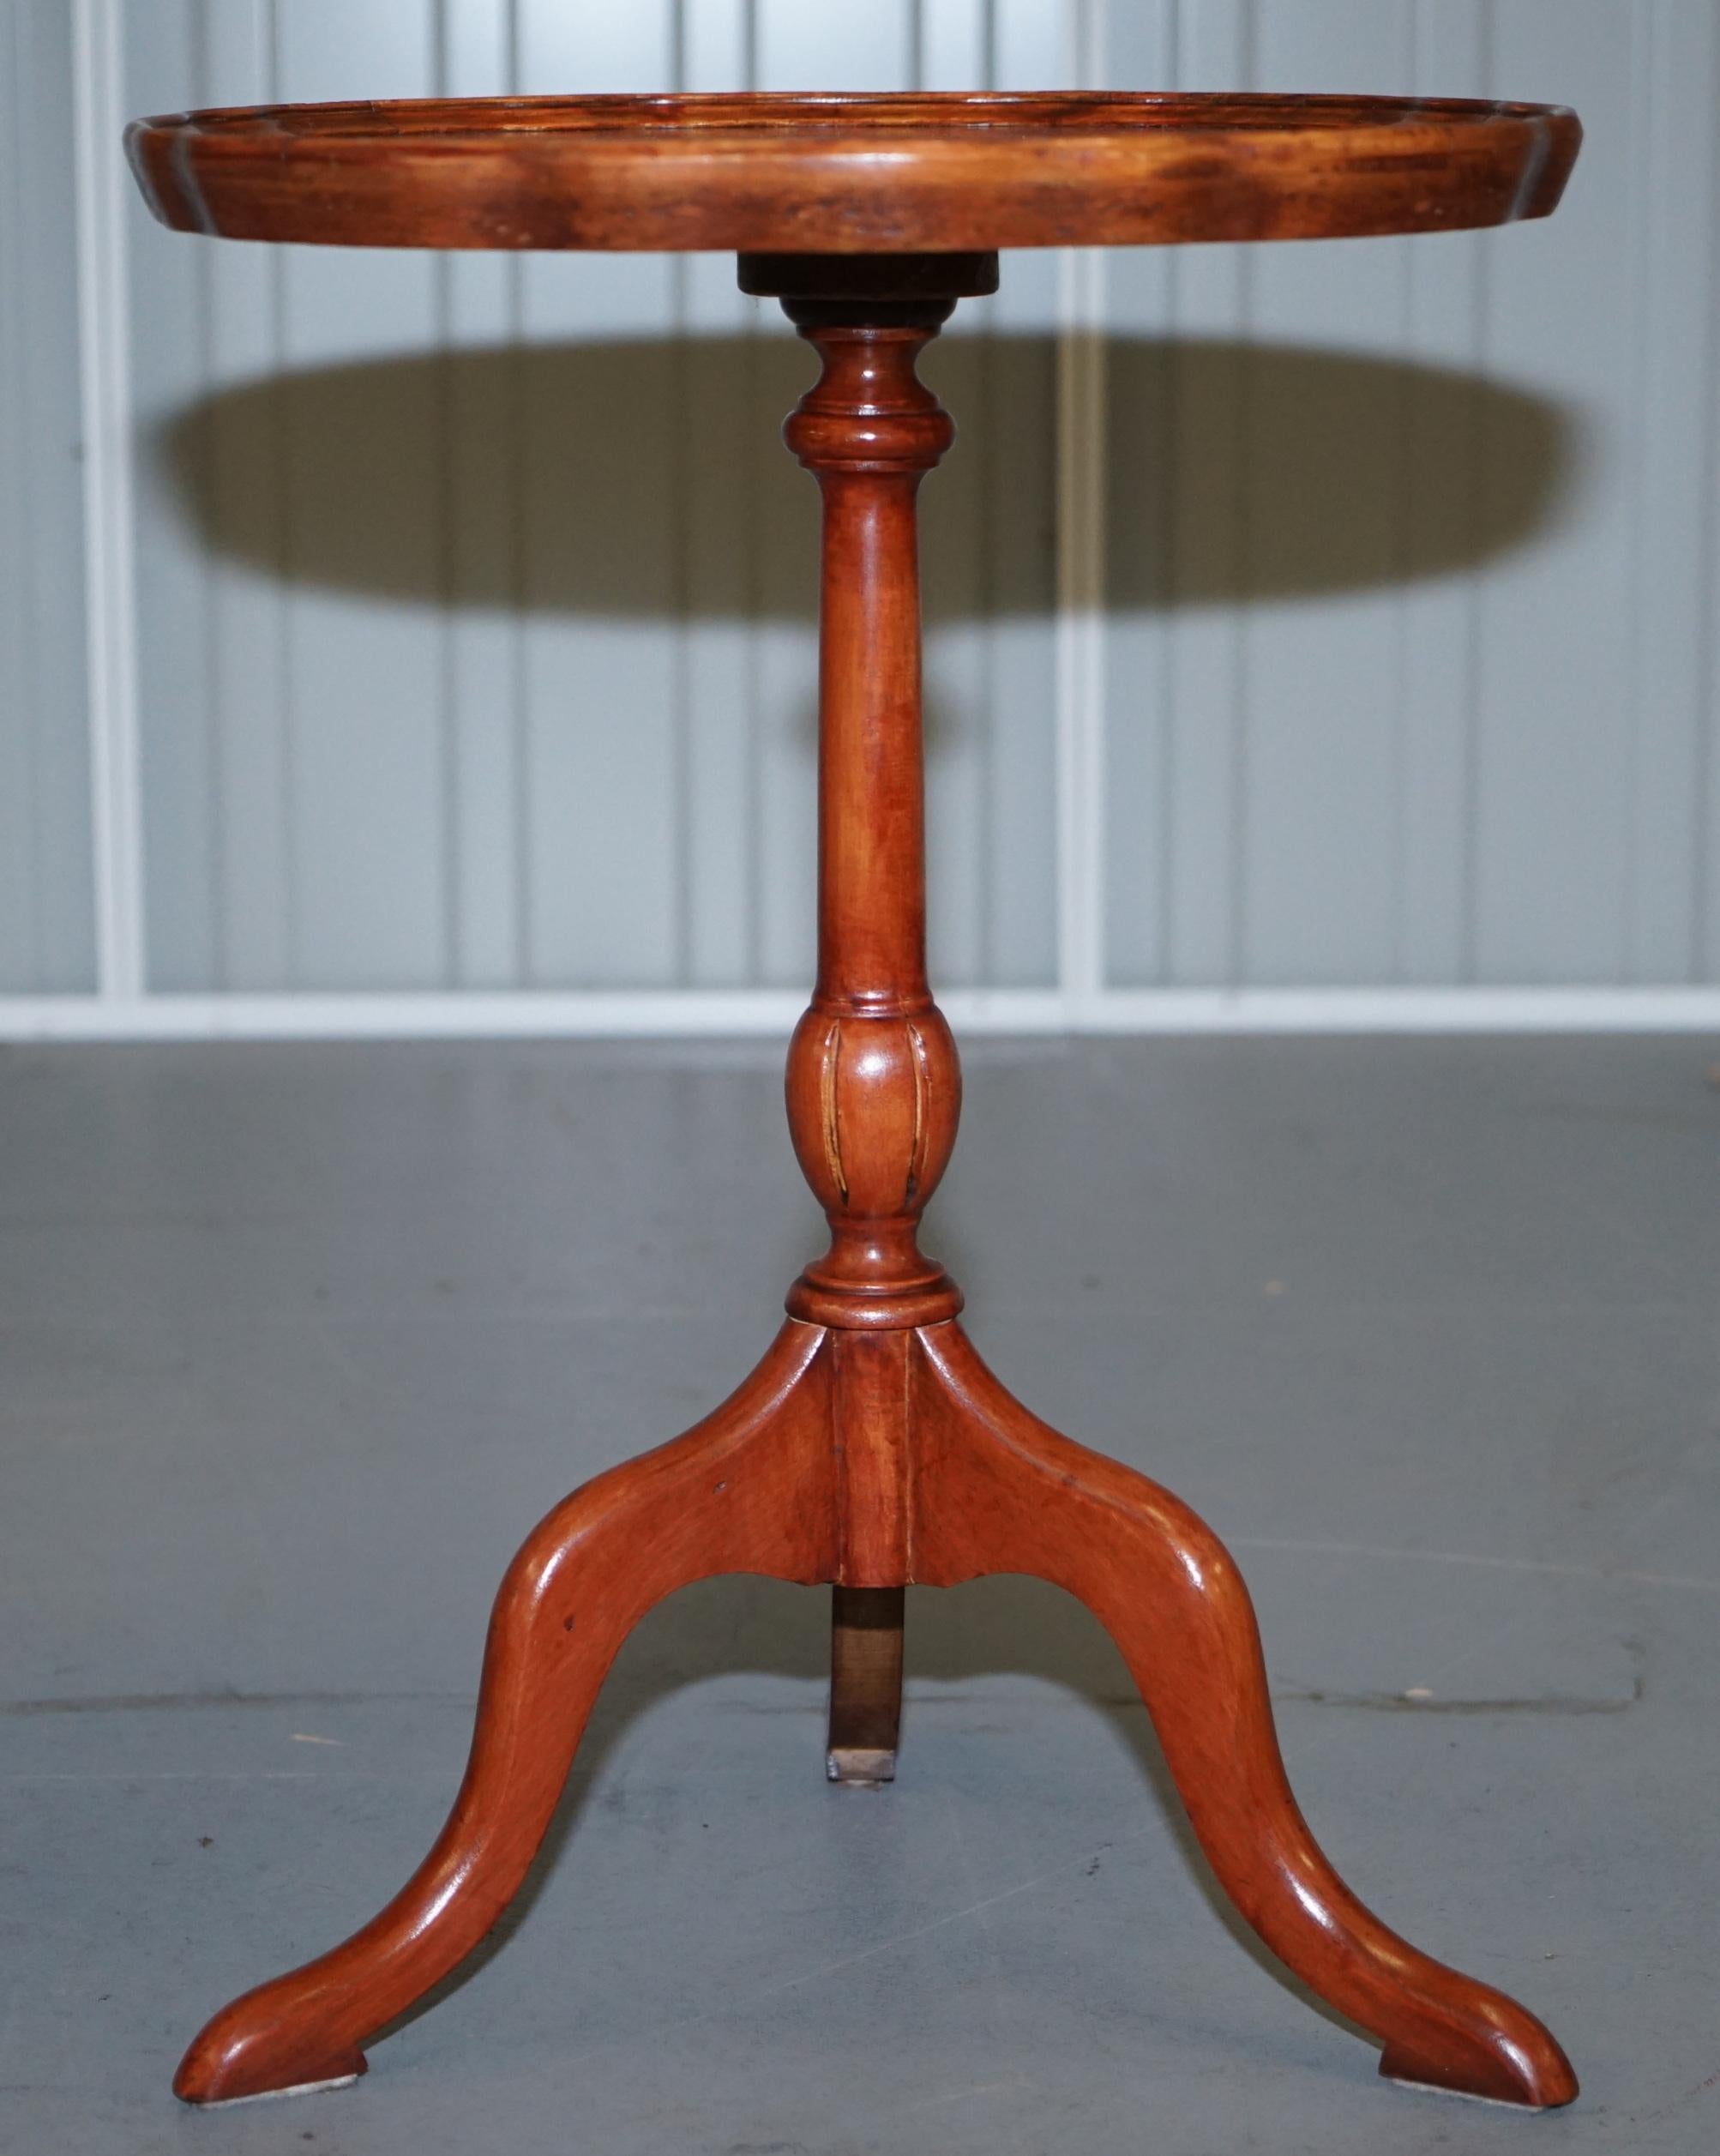 We are delighted to offer for sale this lovely vintage light walnut pie crust edge lamp or side table 

A good looking well made tripod table in good, we have cleaned waxed and polished it from top to bottom, there will be normal patina marks from